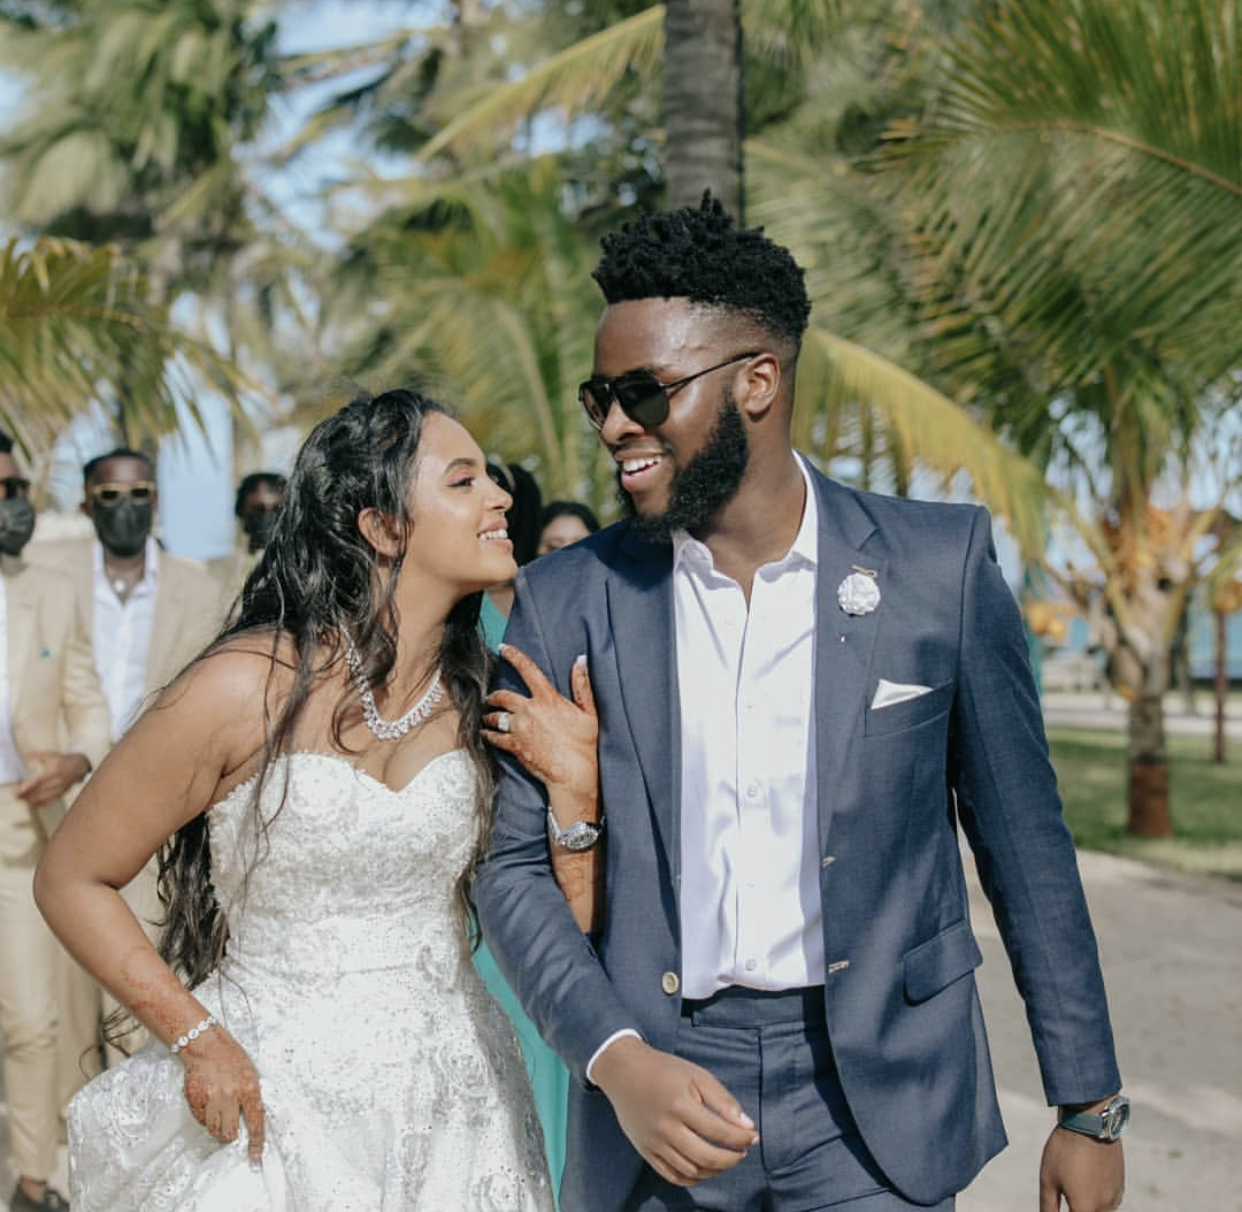 This Indian Beauty Is So Excited To Be Married To Her Nigerian Yoruba Prince. Check Out The Video Of Their Seaside Wedding